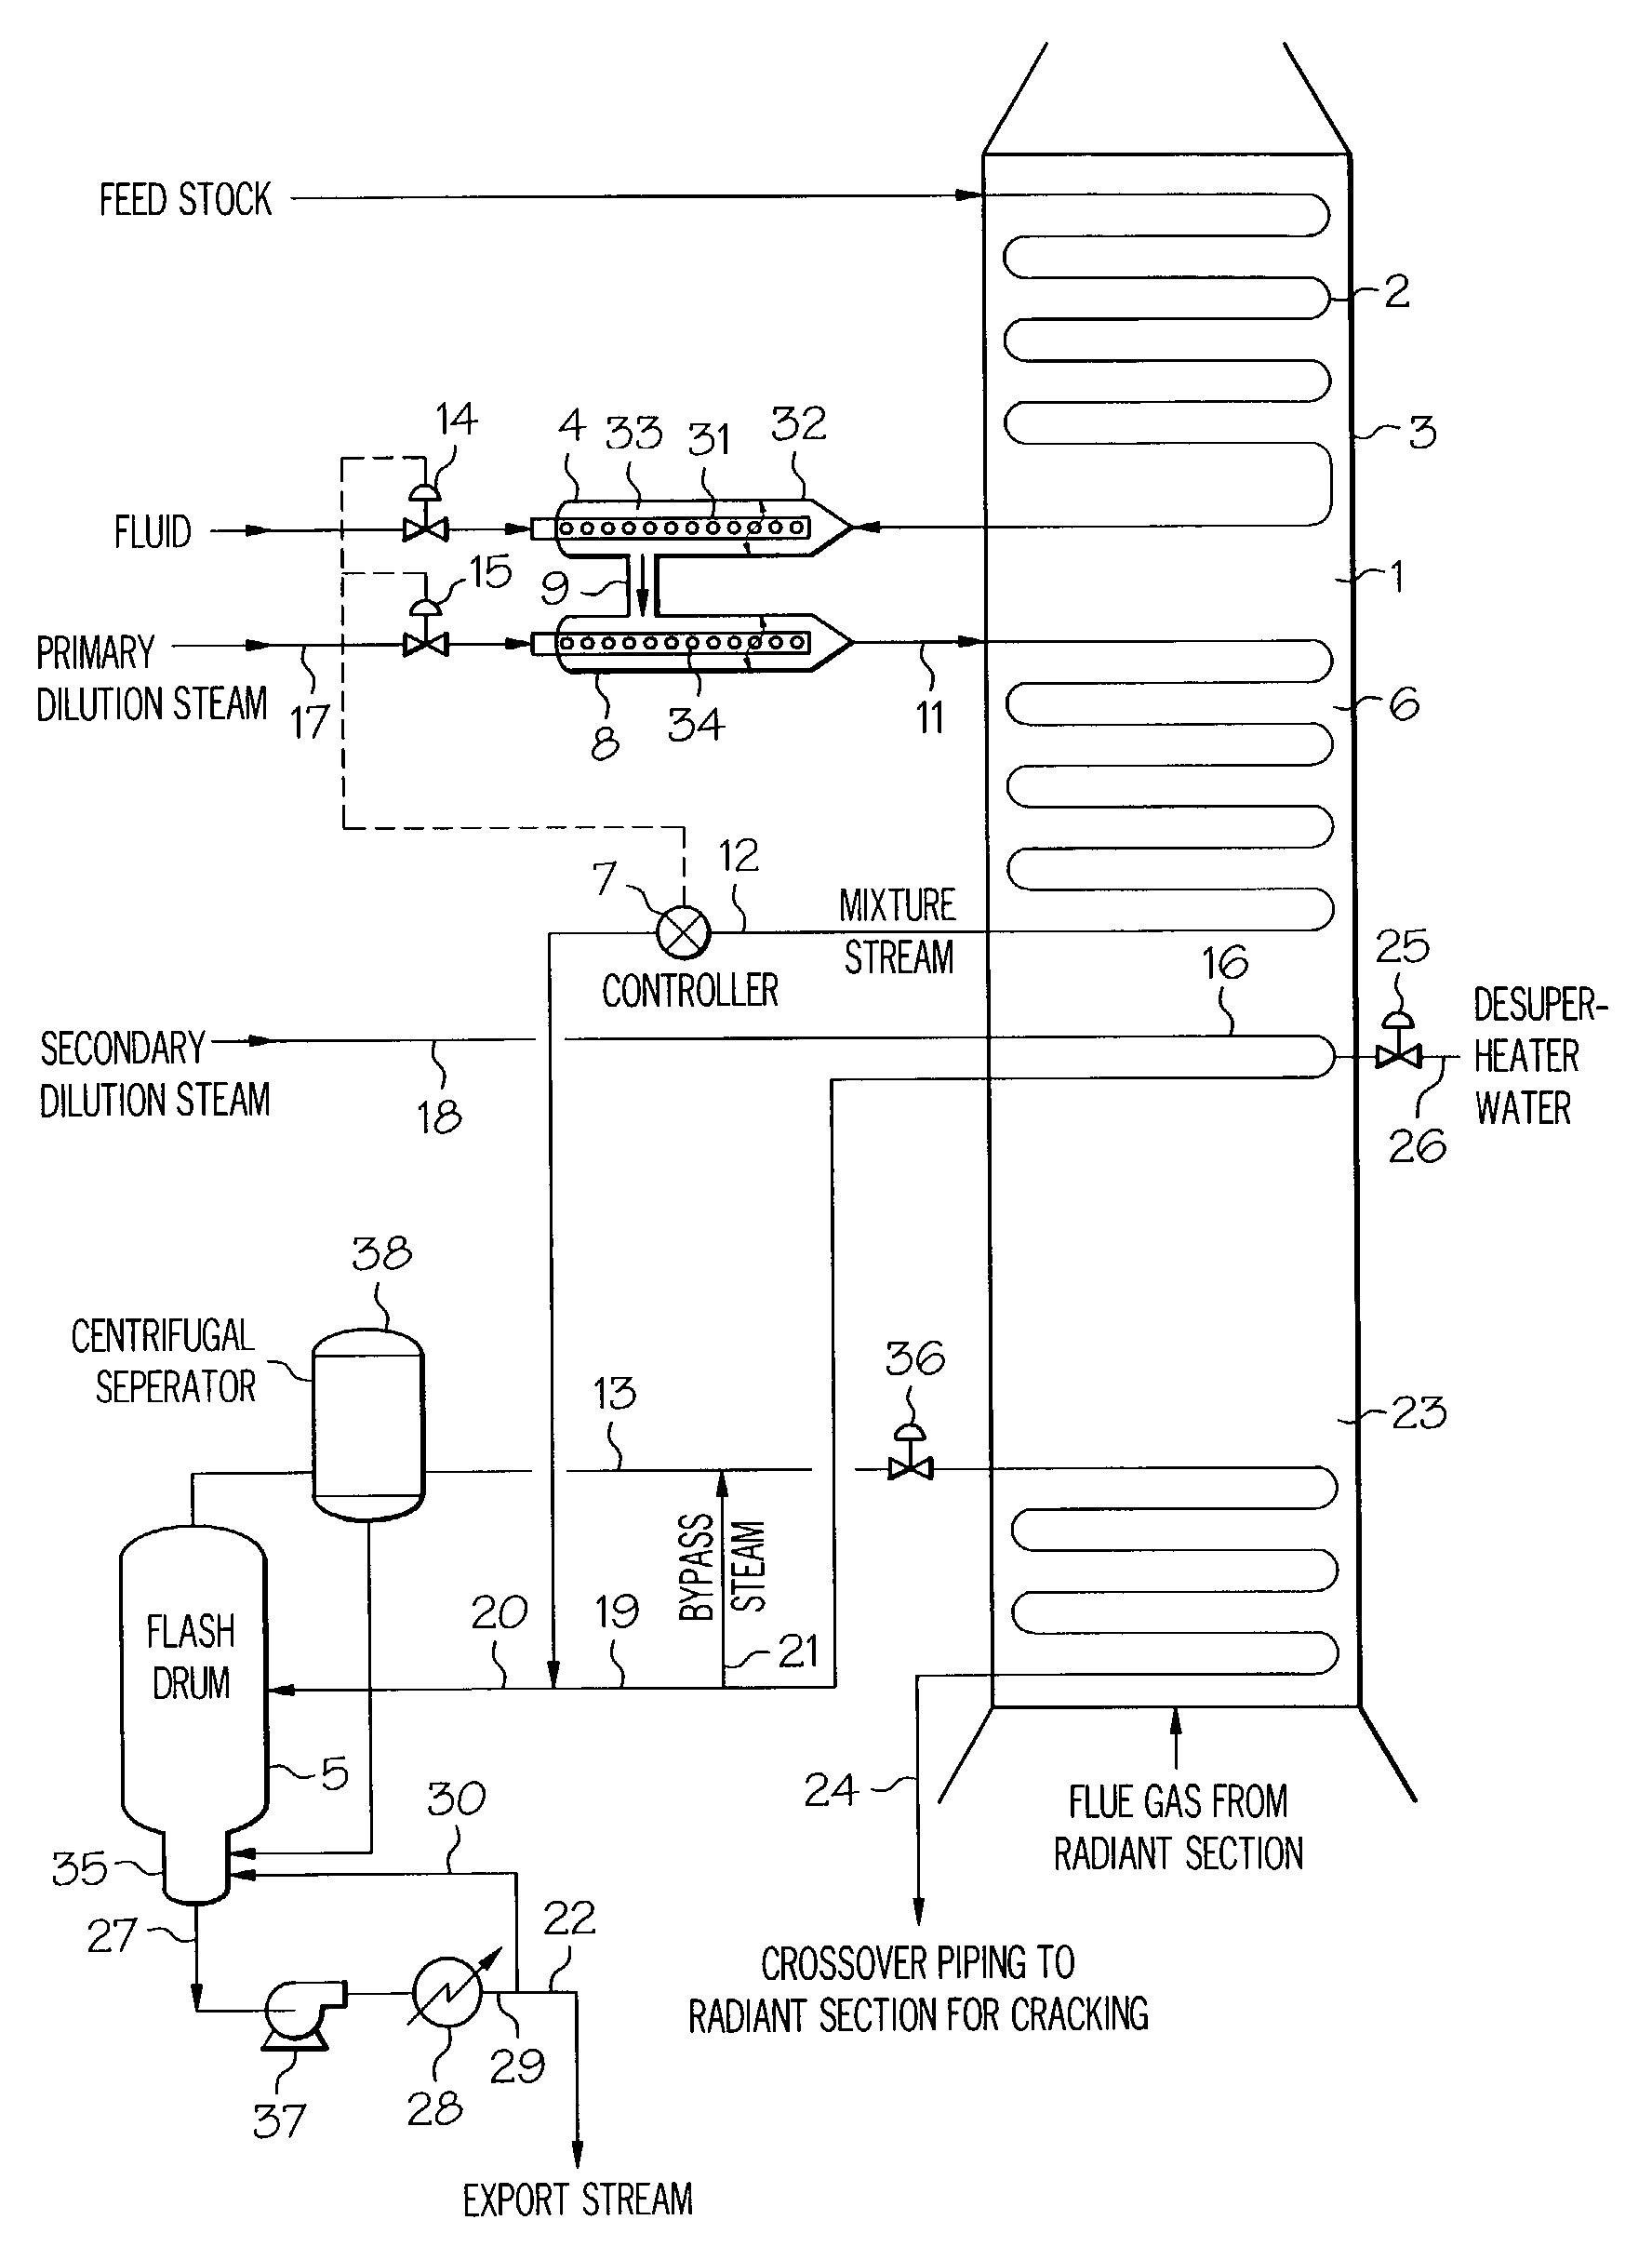 Process for steam cracking heavy hydrocarbon feedstocks